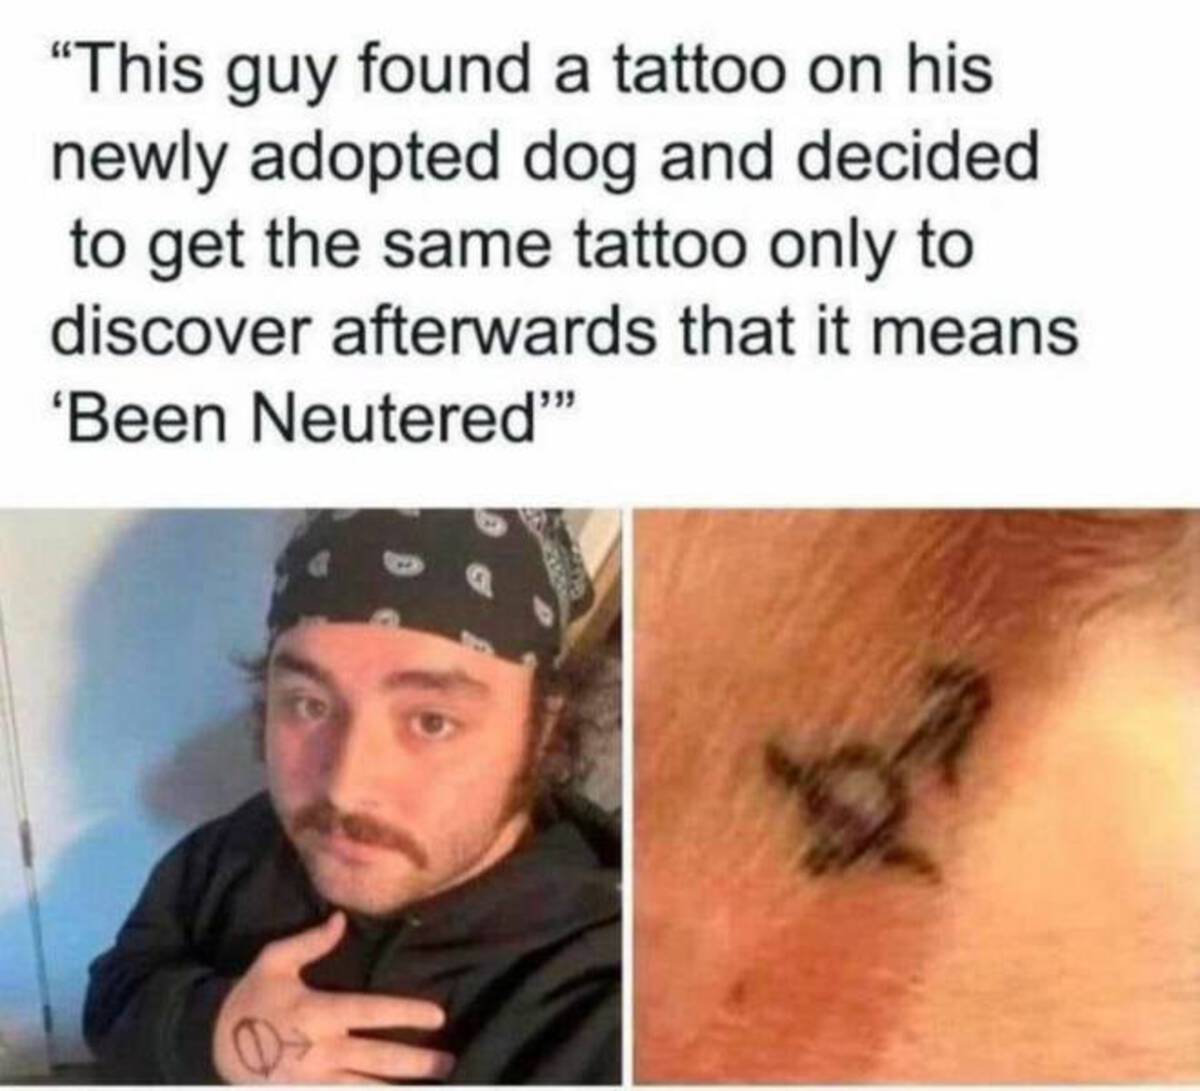 head - "This guy found a tattoo on his newly adopted dog and decided to get the same tattoo only to discover afterwards that it means 'Been Neutered""